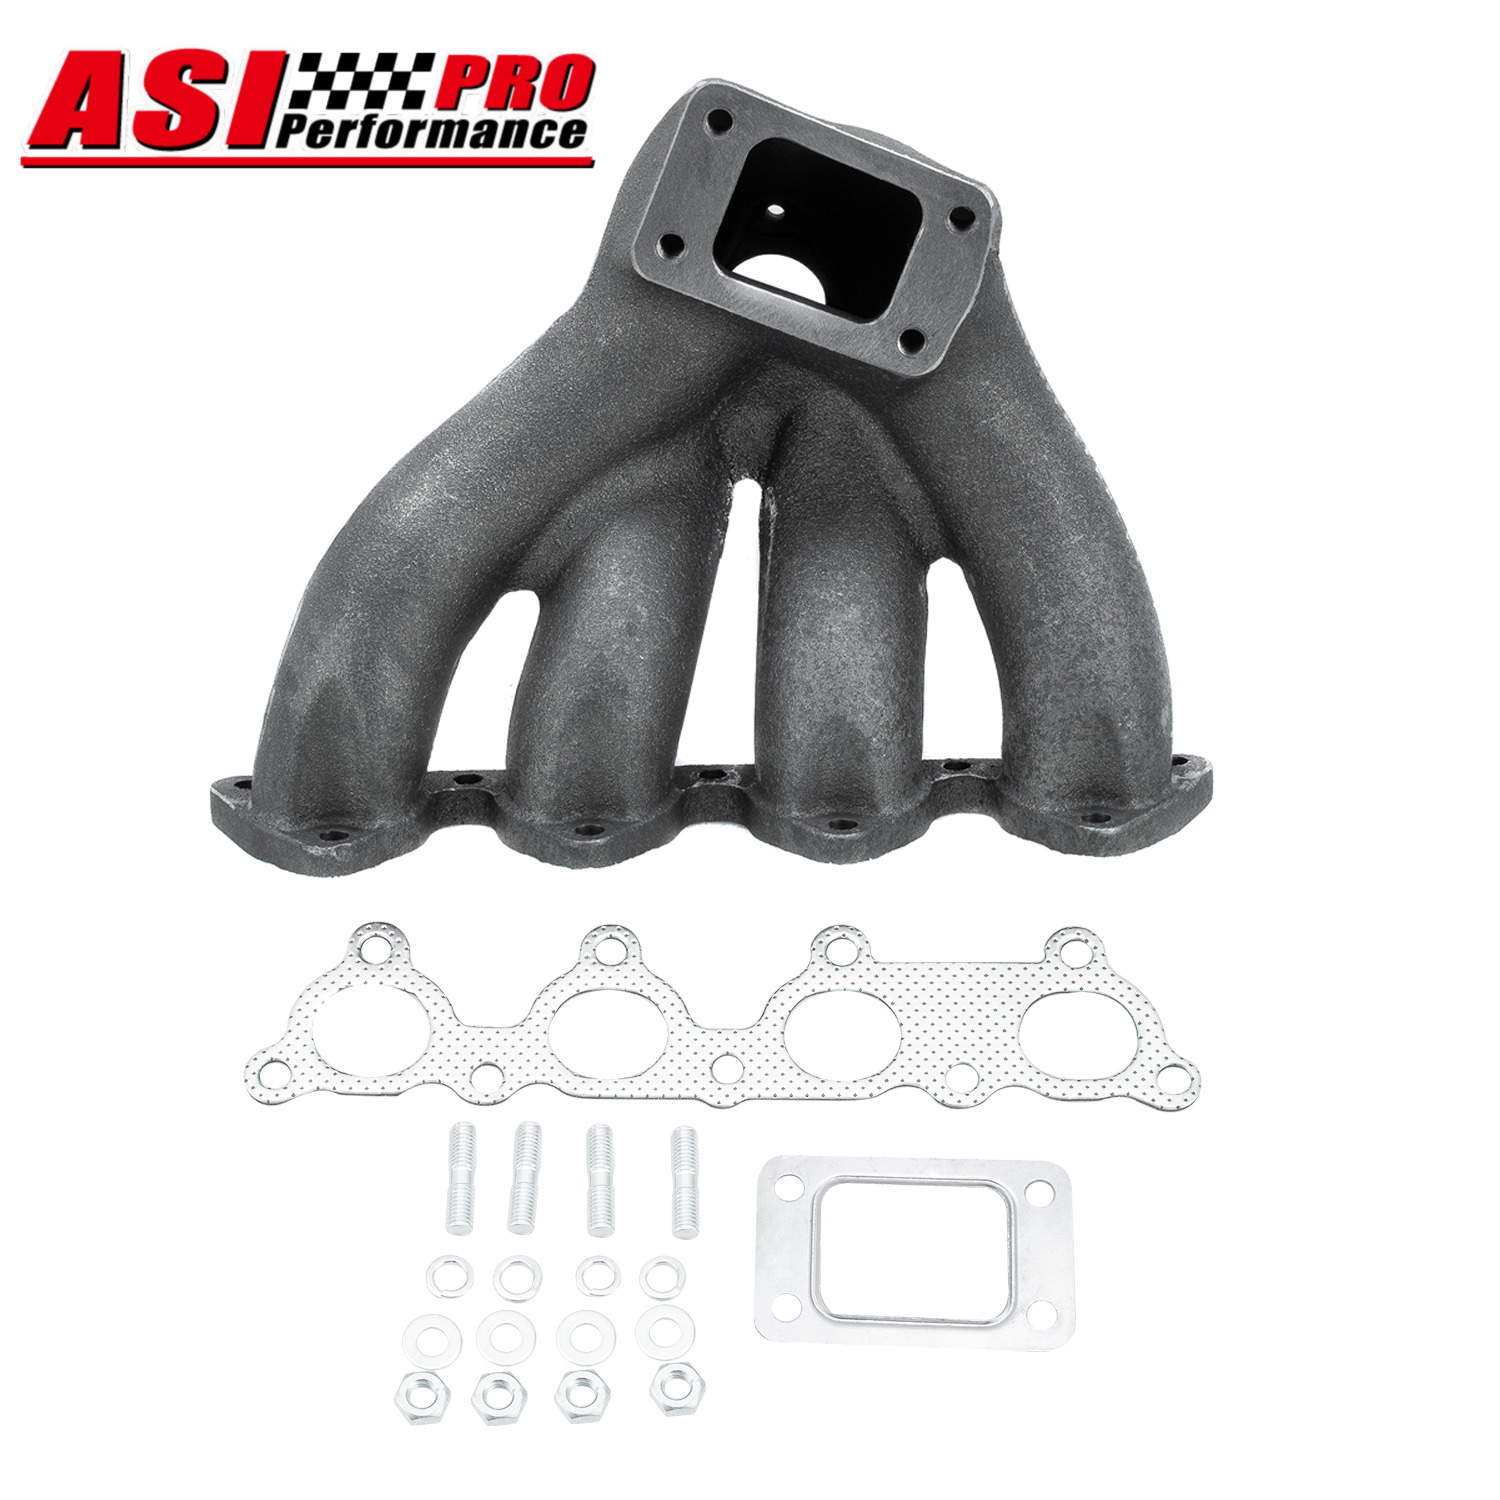 Cast Iron T3/T4 Top Mount Turbo Exhaust Manifold For 88-2000 Honda Civic D15/D16